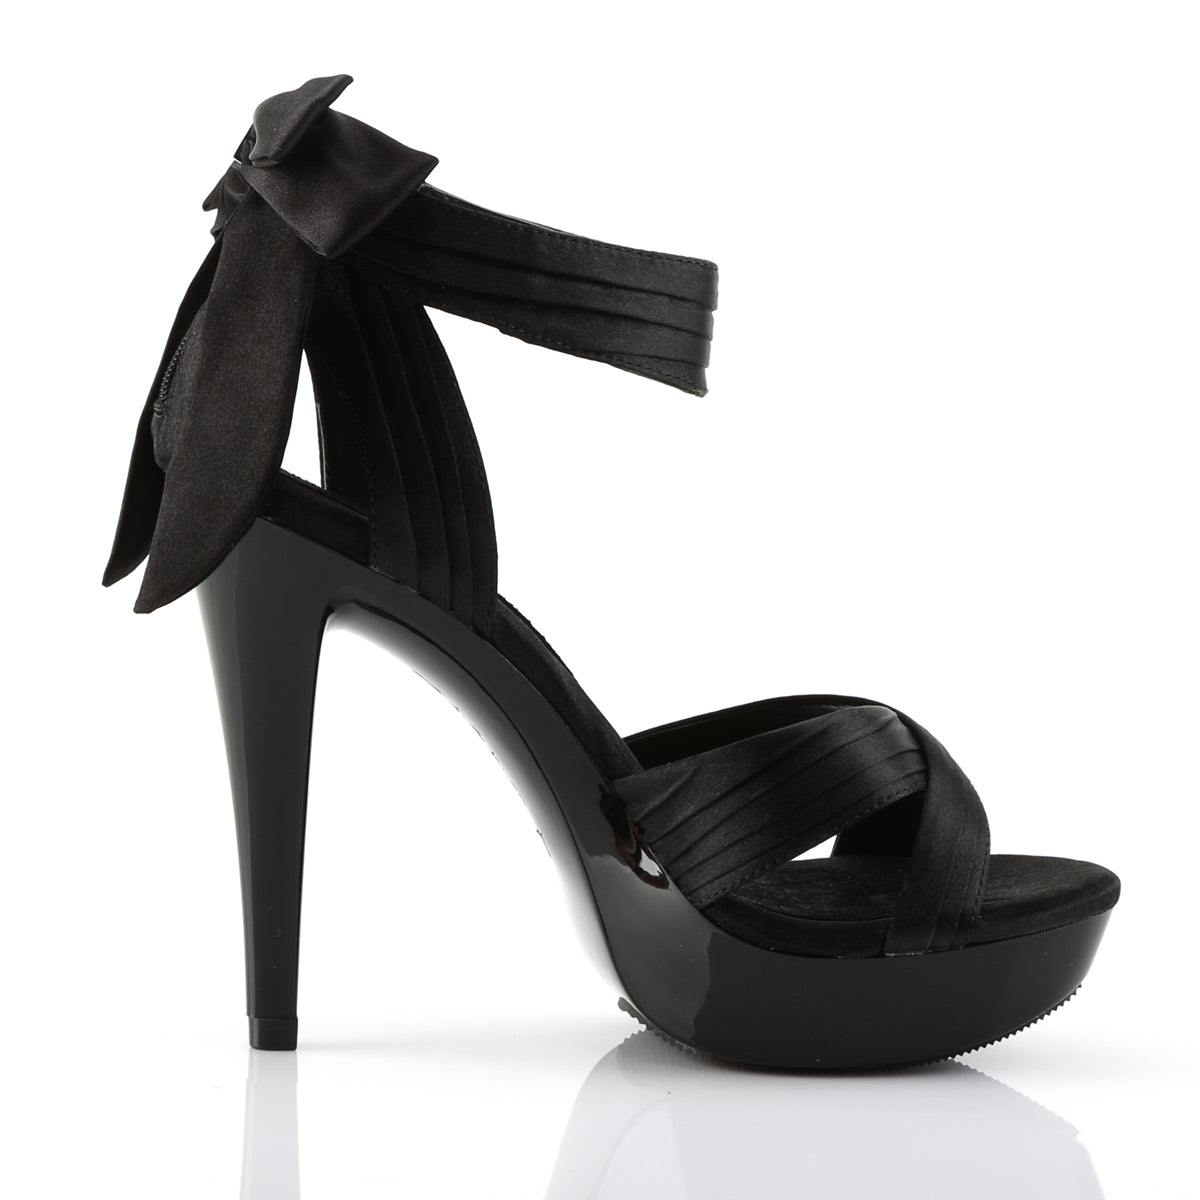 COCKTAIL-568 Fabulicious Black Satin/Black Shoes [Sexy Shoes]